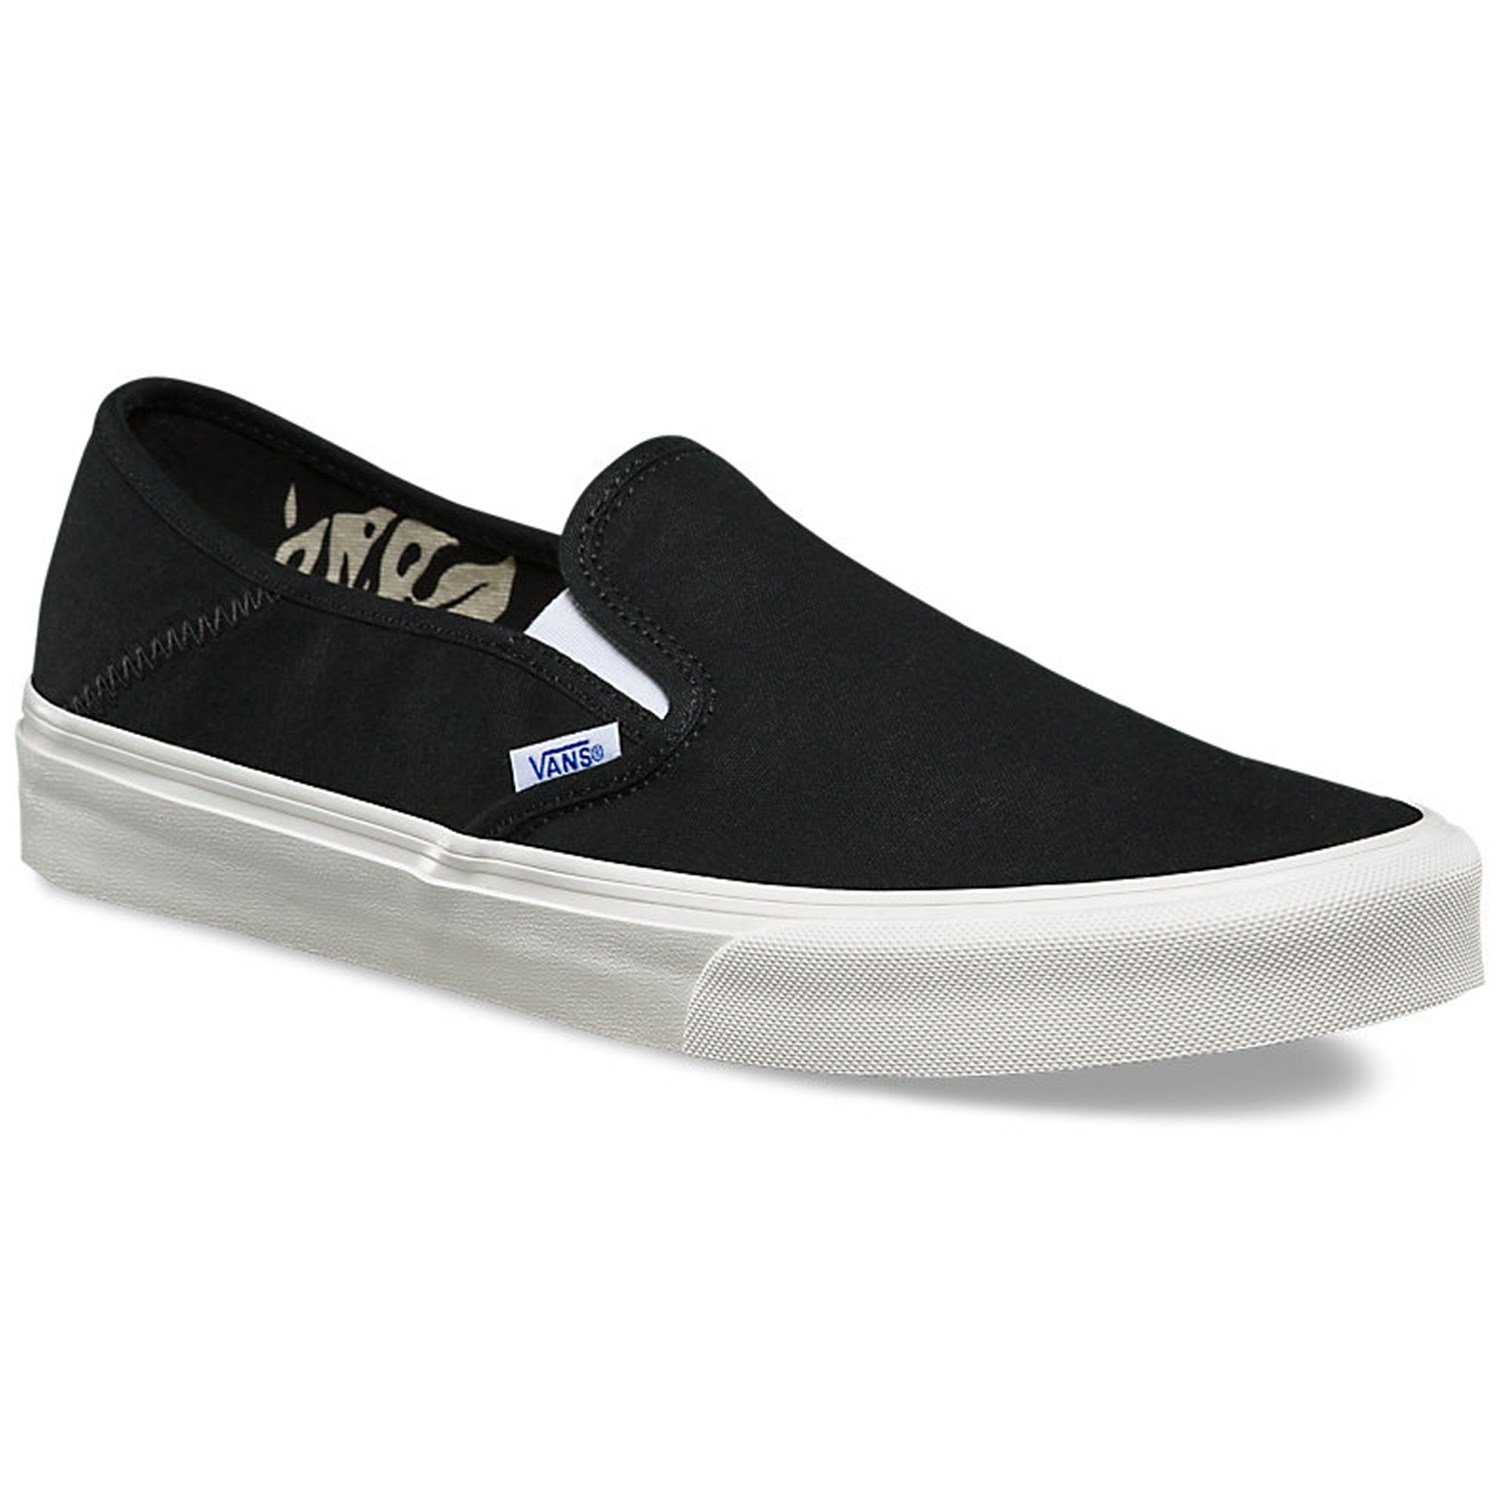 surf brand shoes